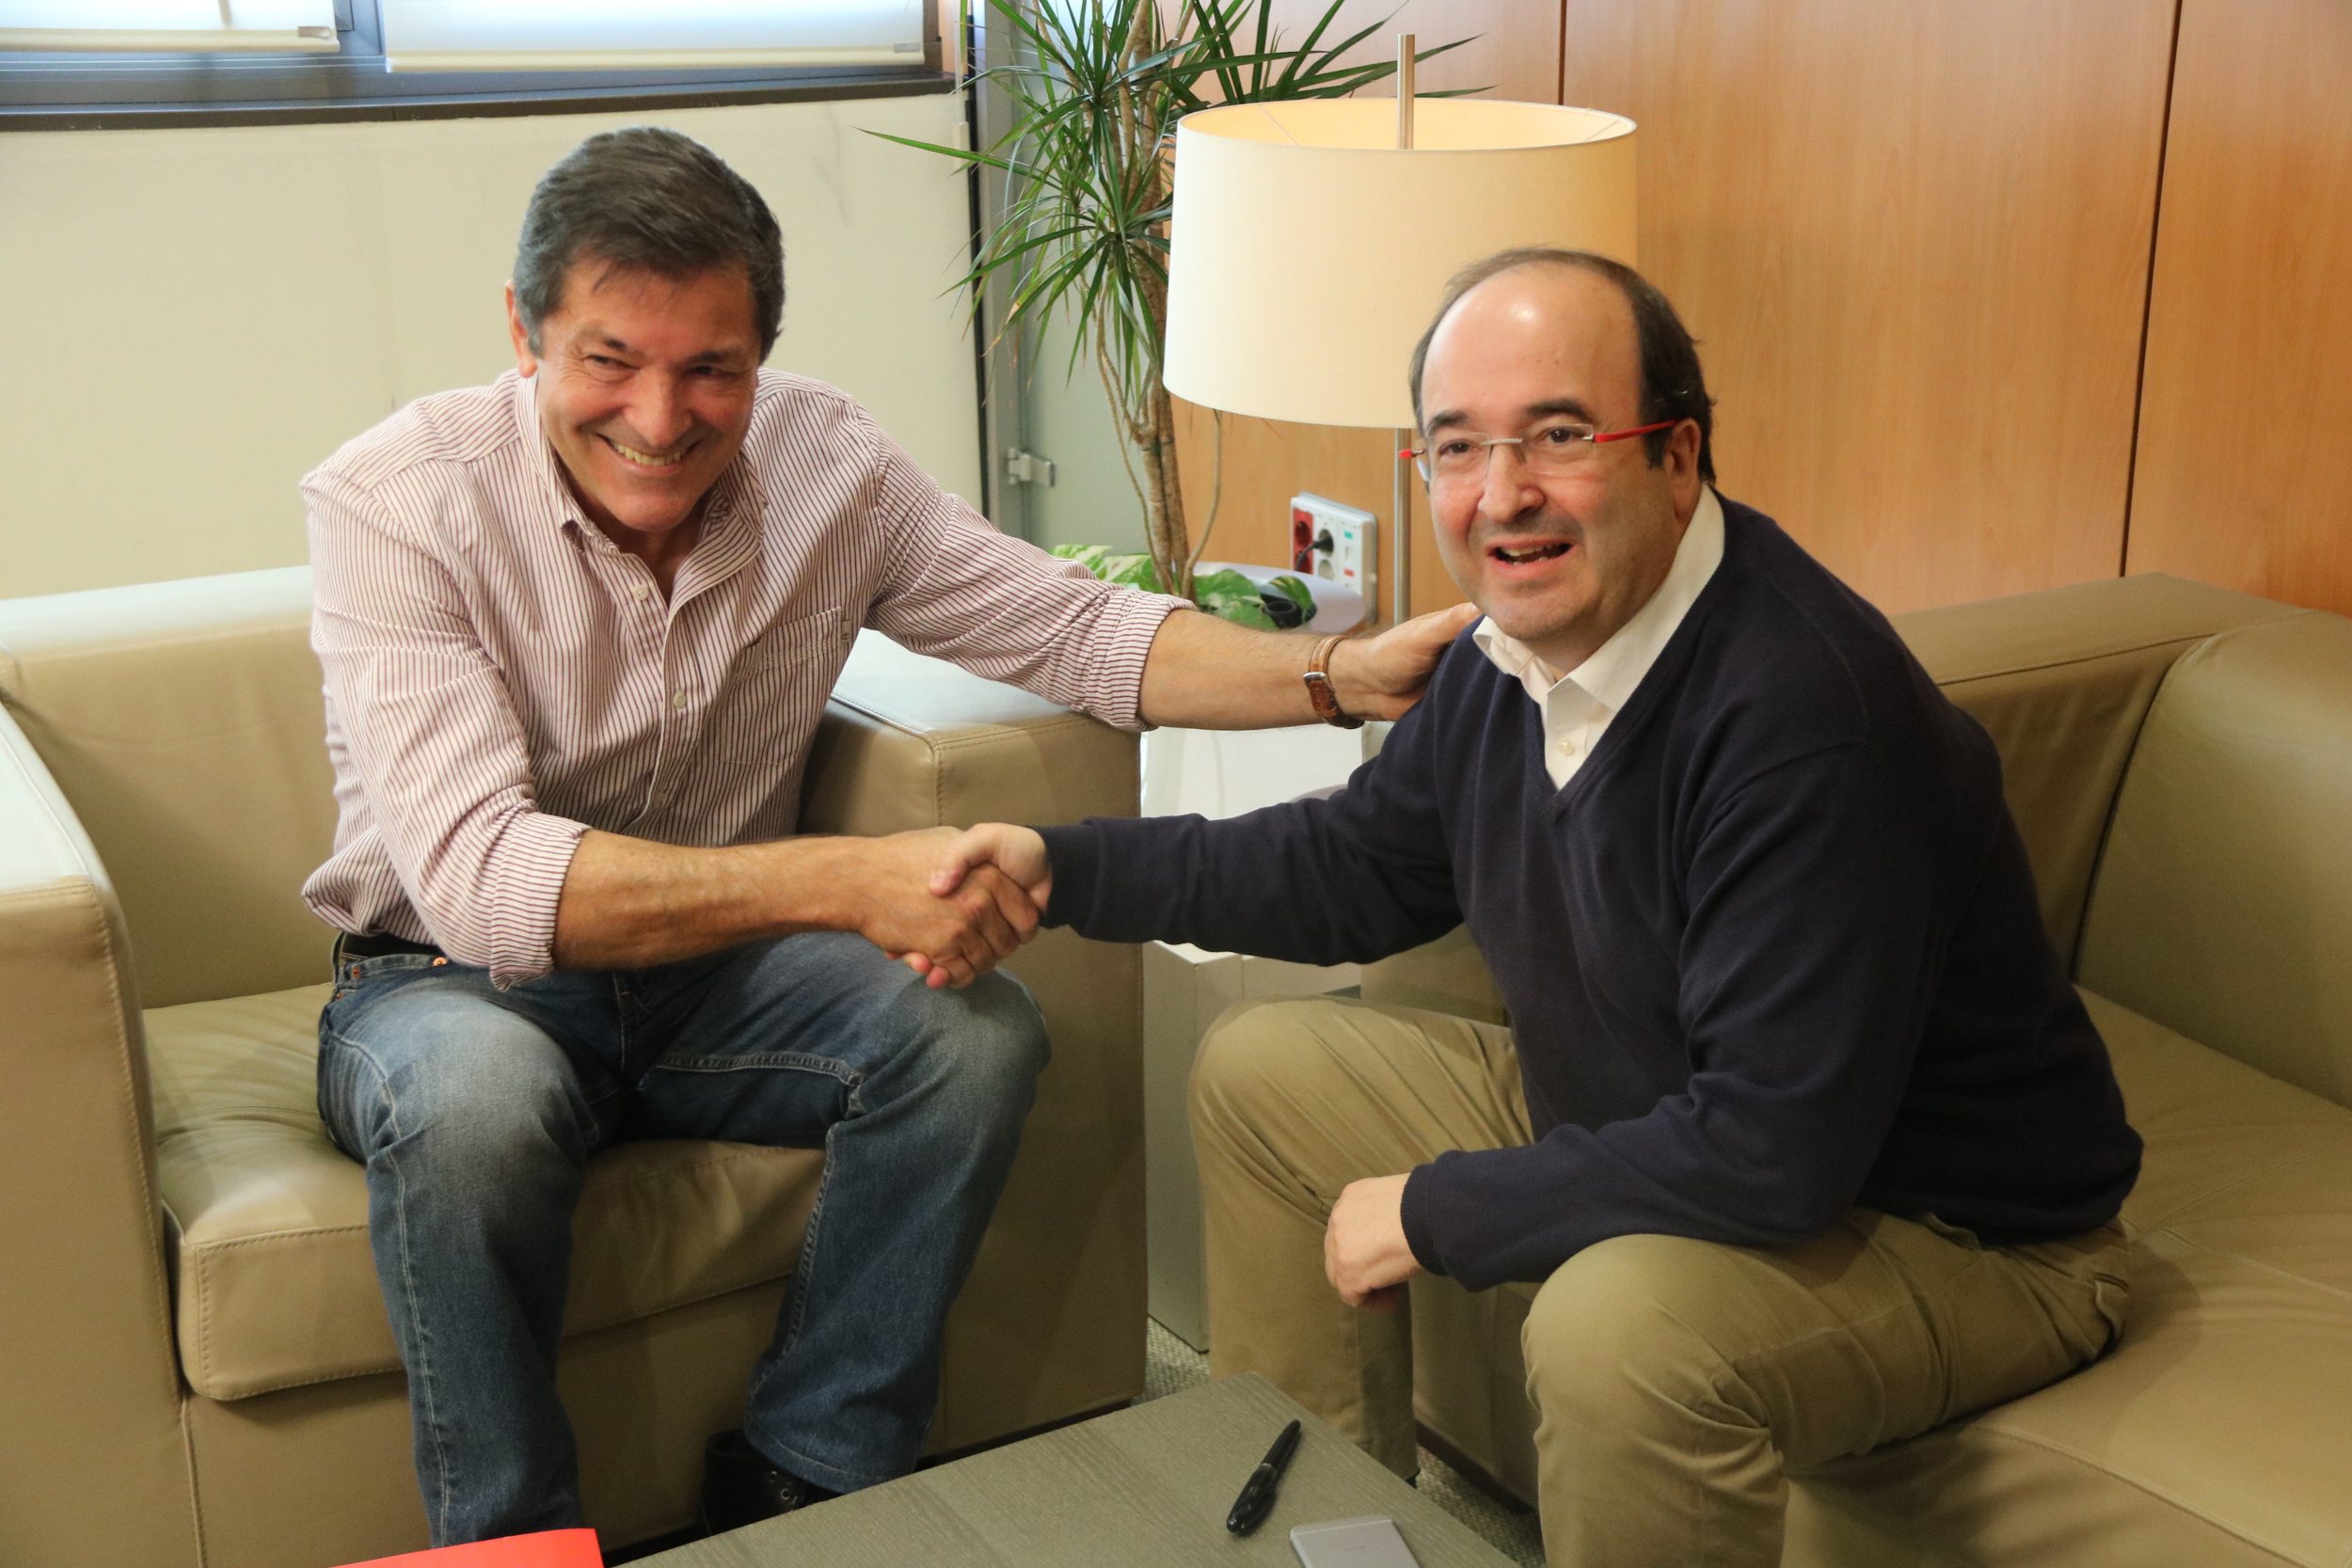 Javier Fernández, president of the PSOE's interim managing committee shaking hands with PSC's leader, Miquel Iceta (by ACN)